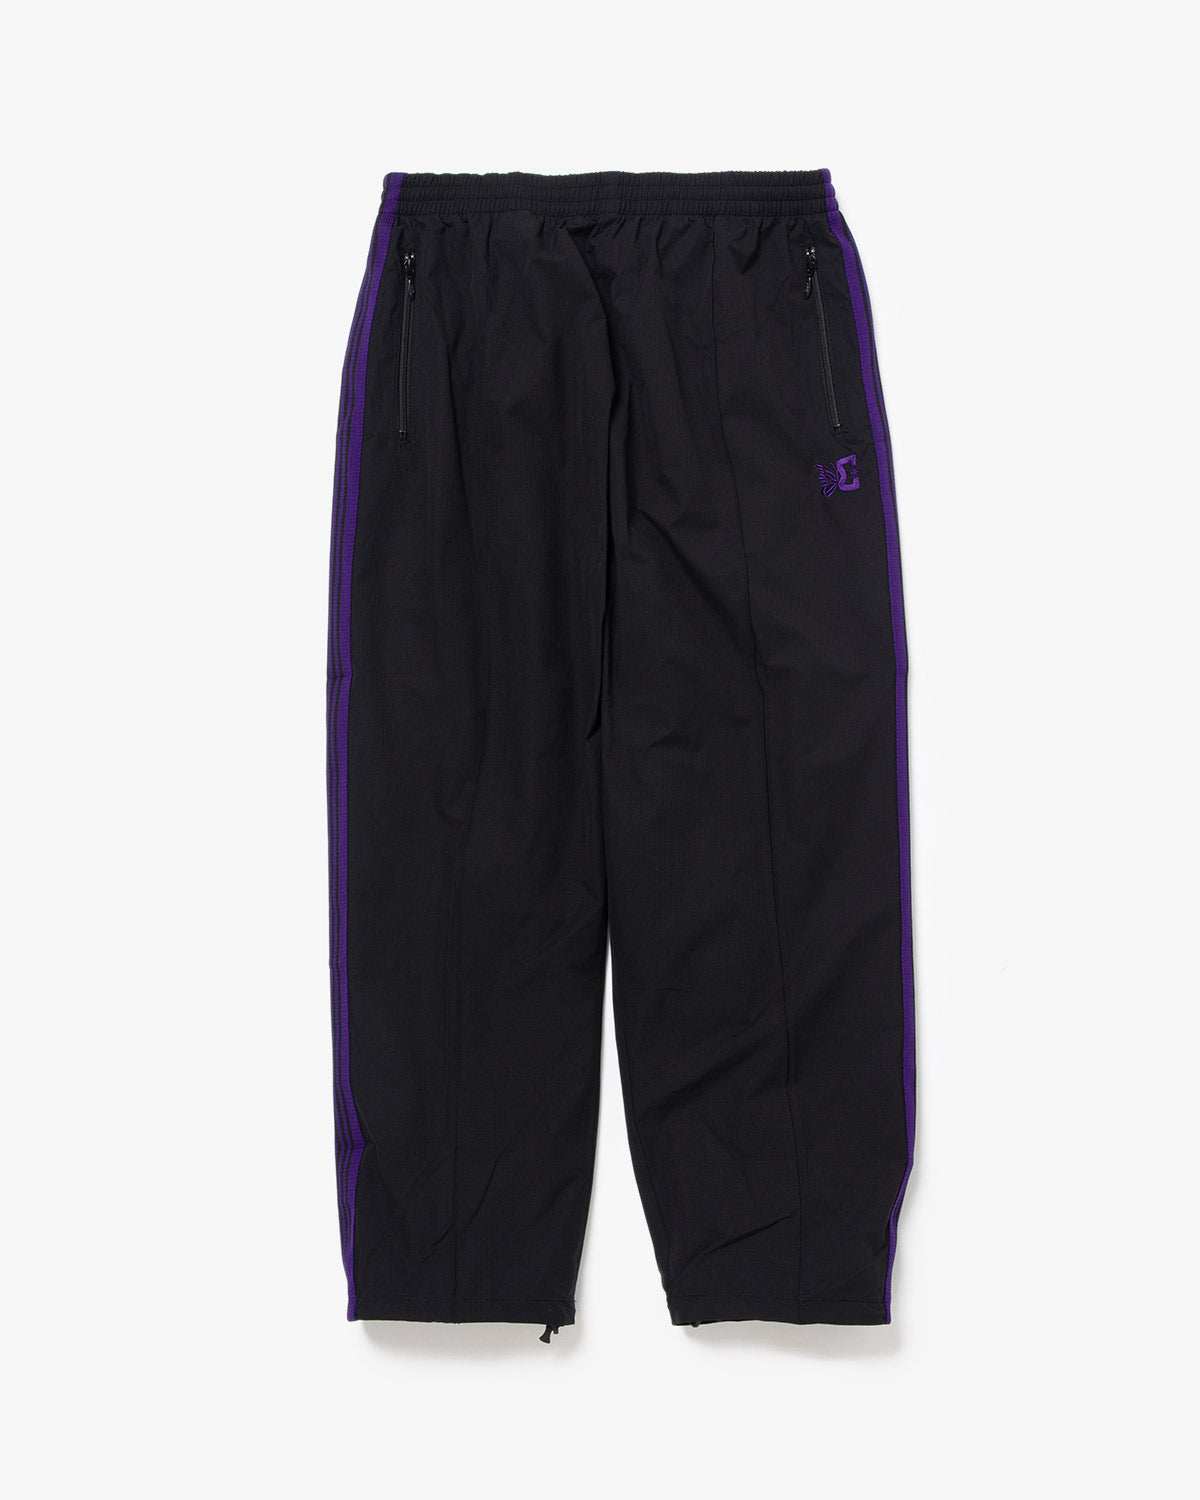 TRACK PANT - POLY RIPSTOP